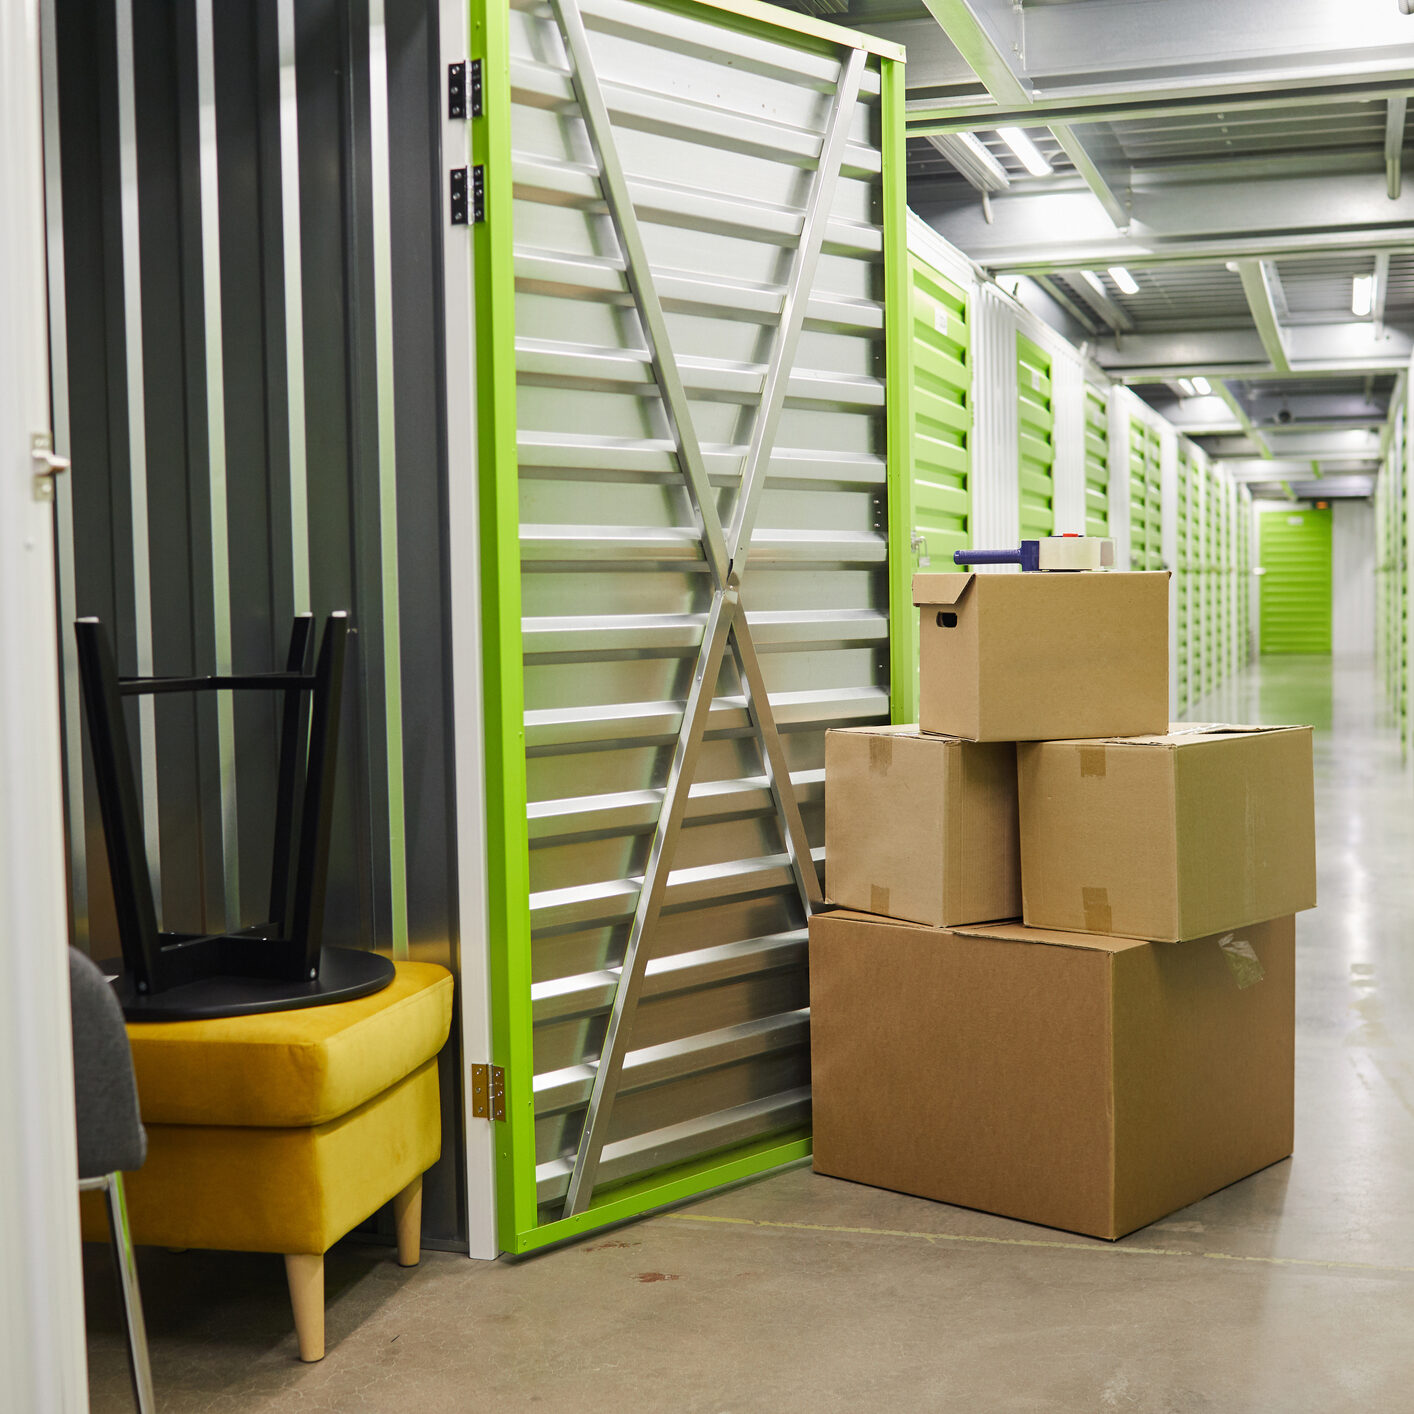 Background image of cardboard boxes stacked by open door of self storage unit, copy space